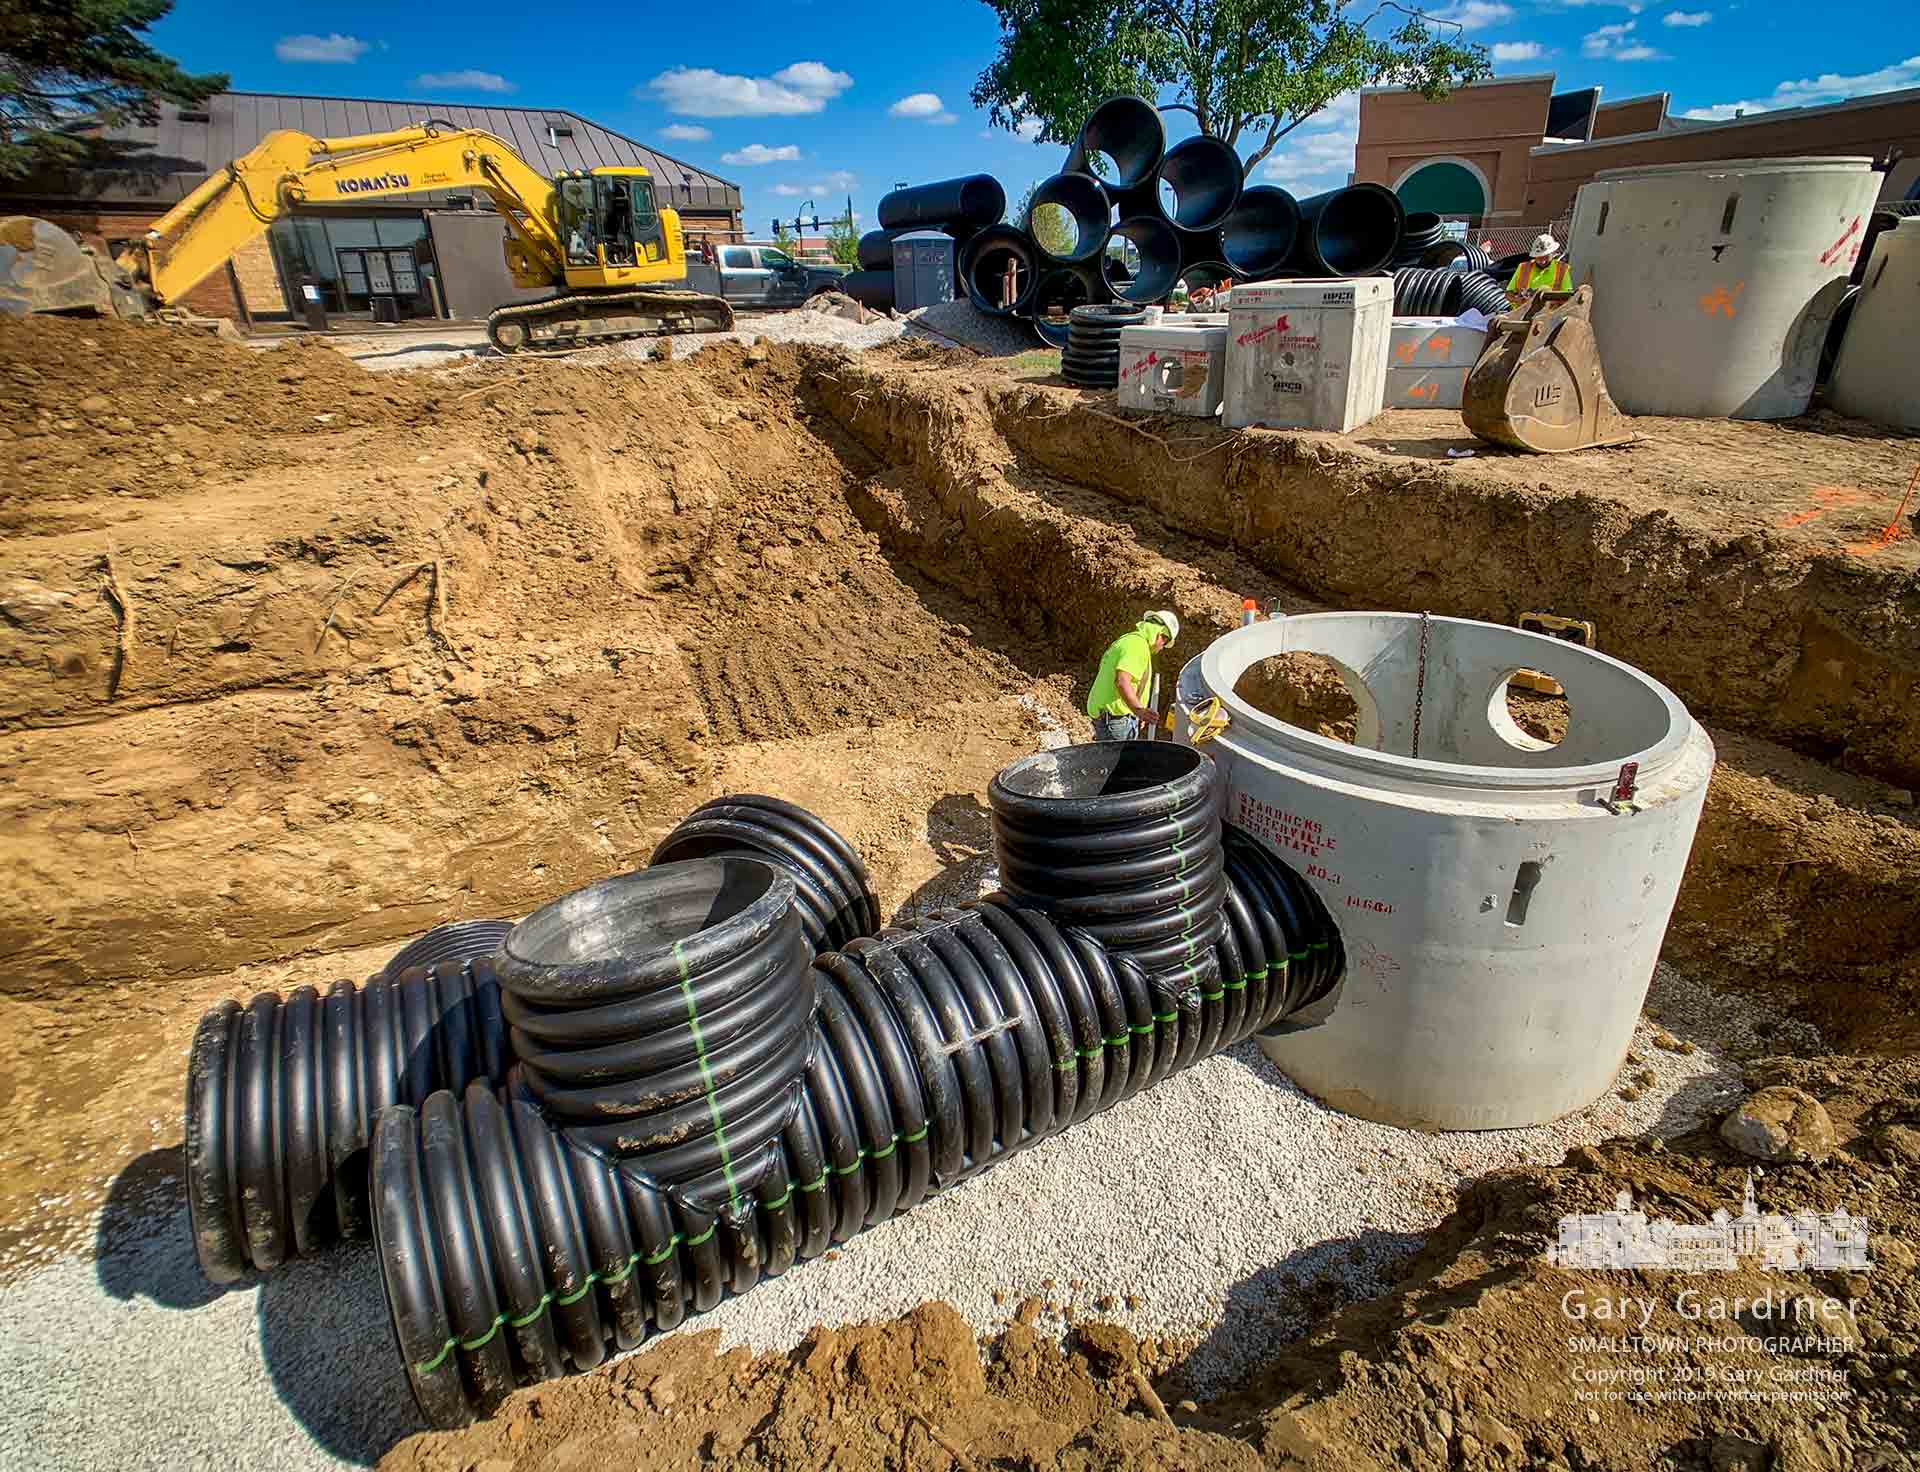 A contractor checks the alignment of corrugated pipes being laid as part of the underground holding tank for storm runoff at the rear of Starbucks on South State where the company is building a new drive-thru and parking lot at the rear of the building. My Final Photo for Sept. 4, 2019.